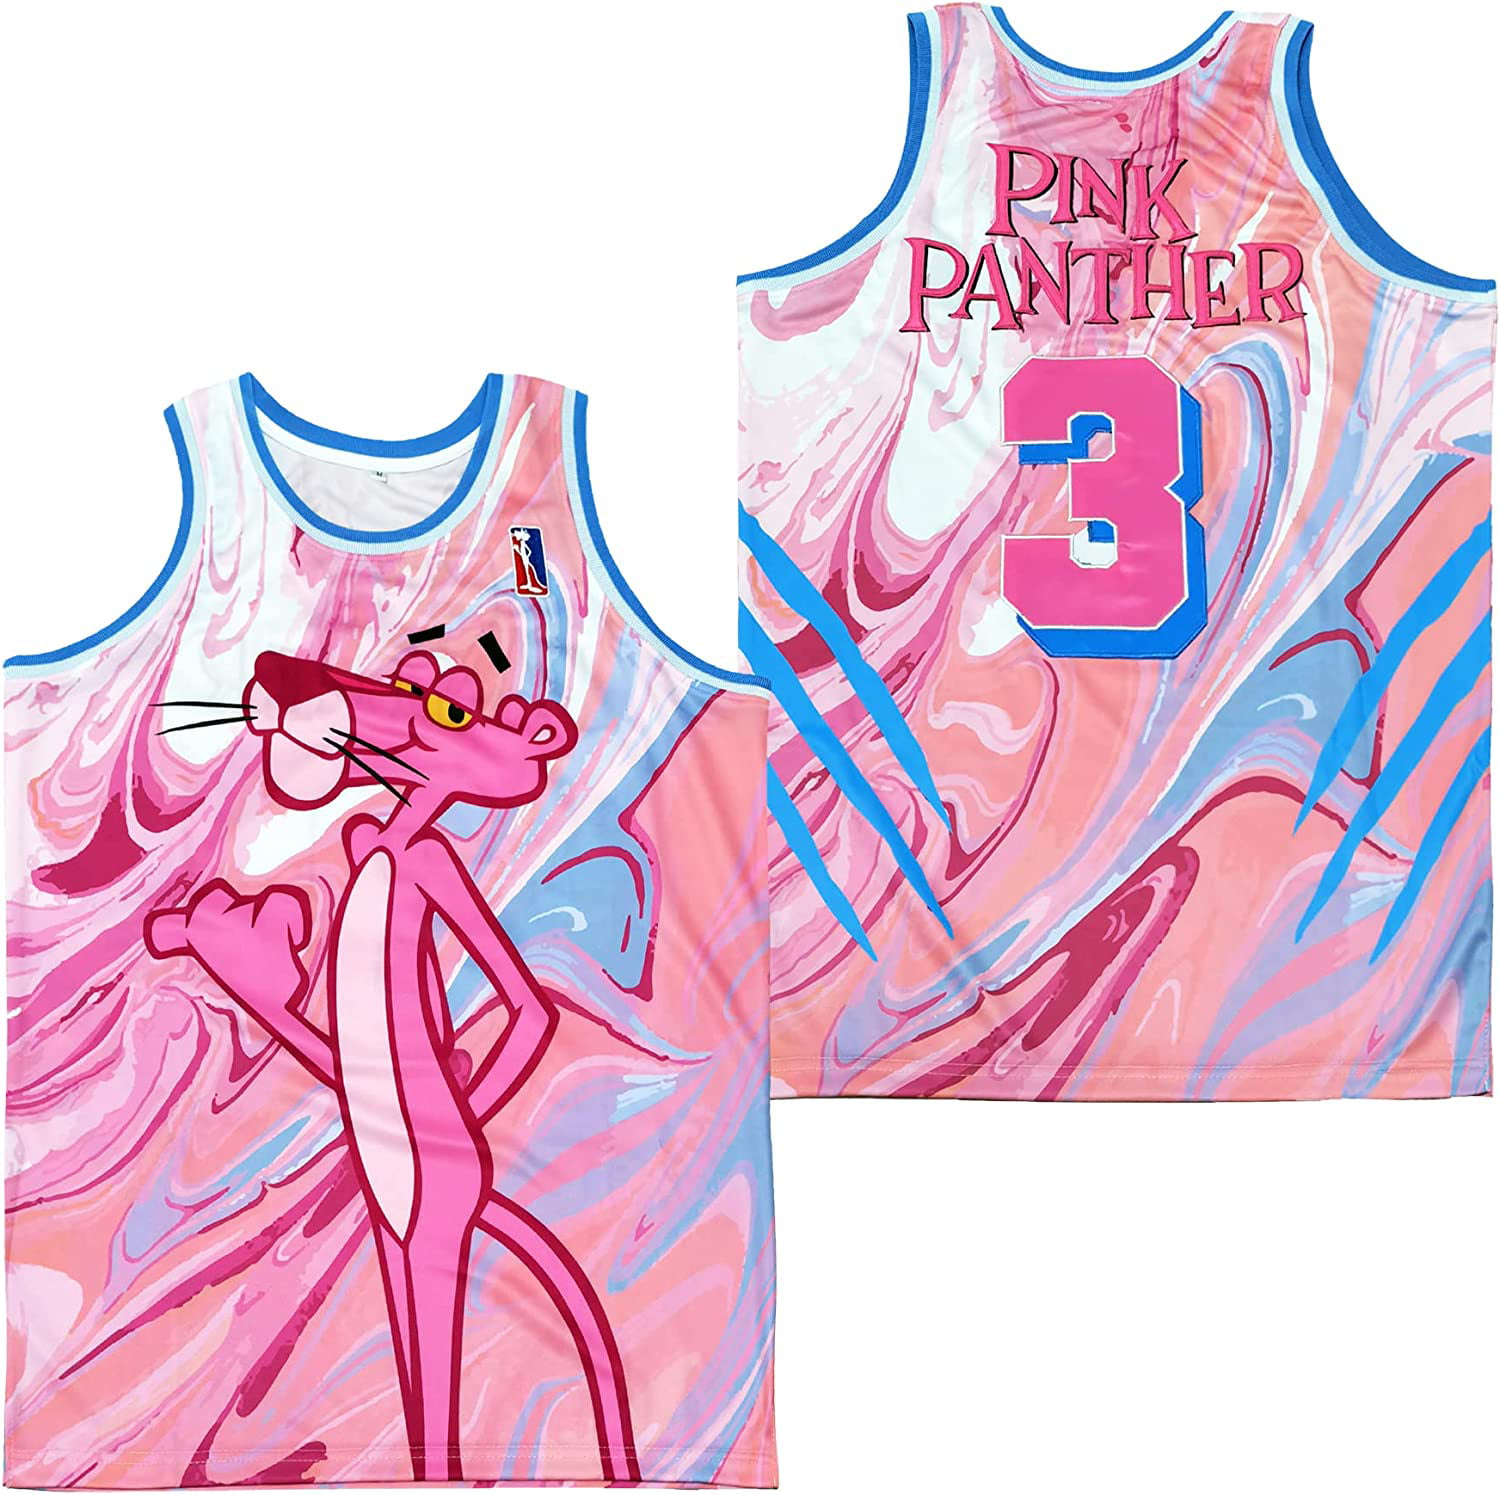 Miami Pink Panther #3 Jersey Size S Jersey has a - Depop